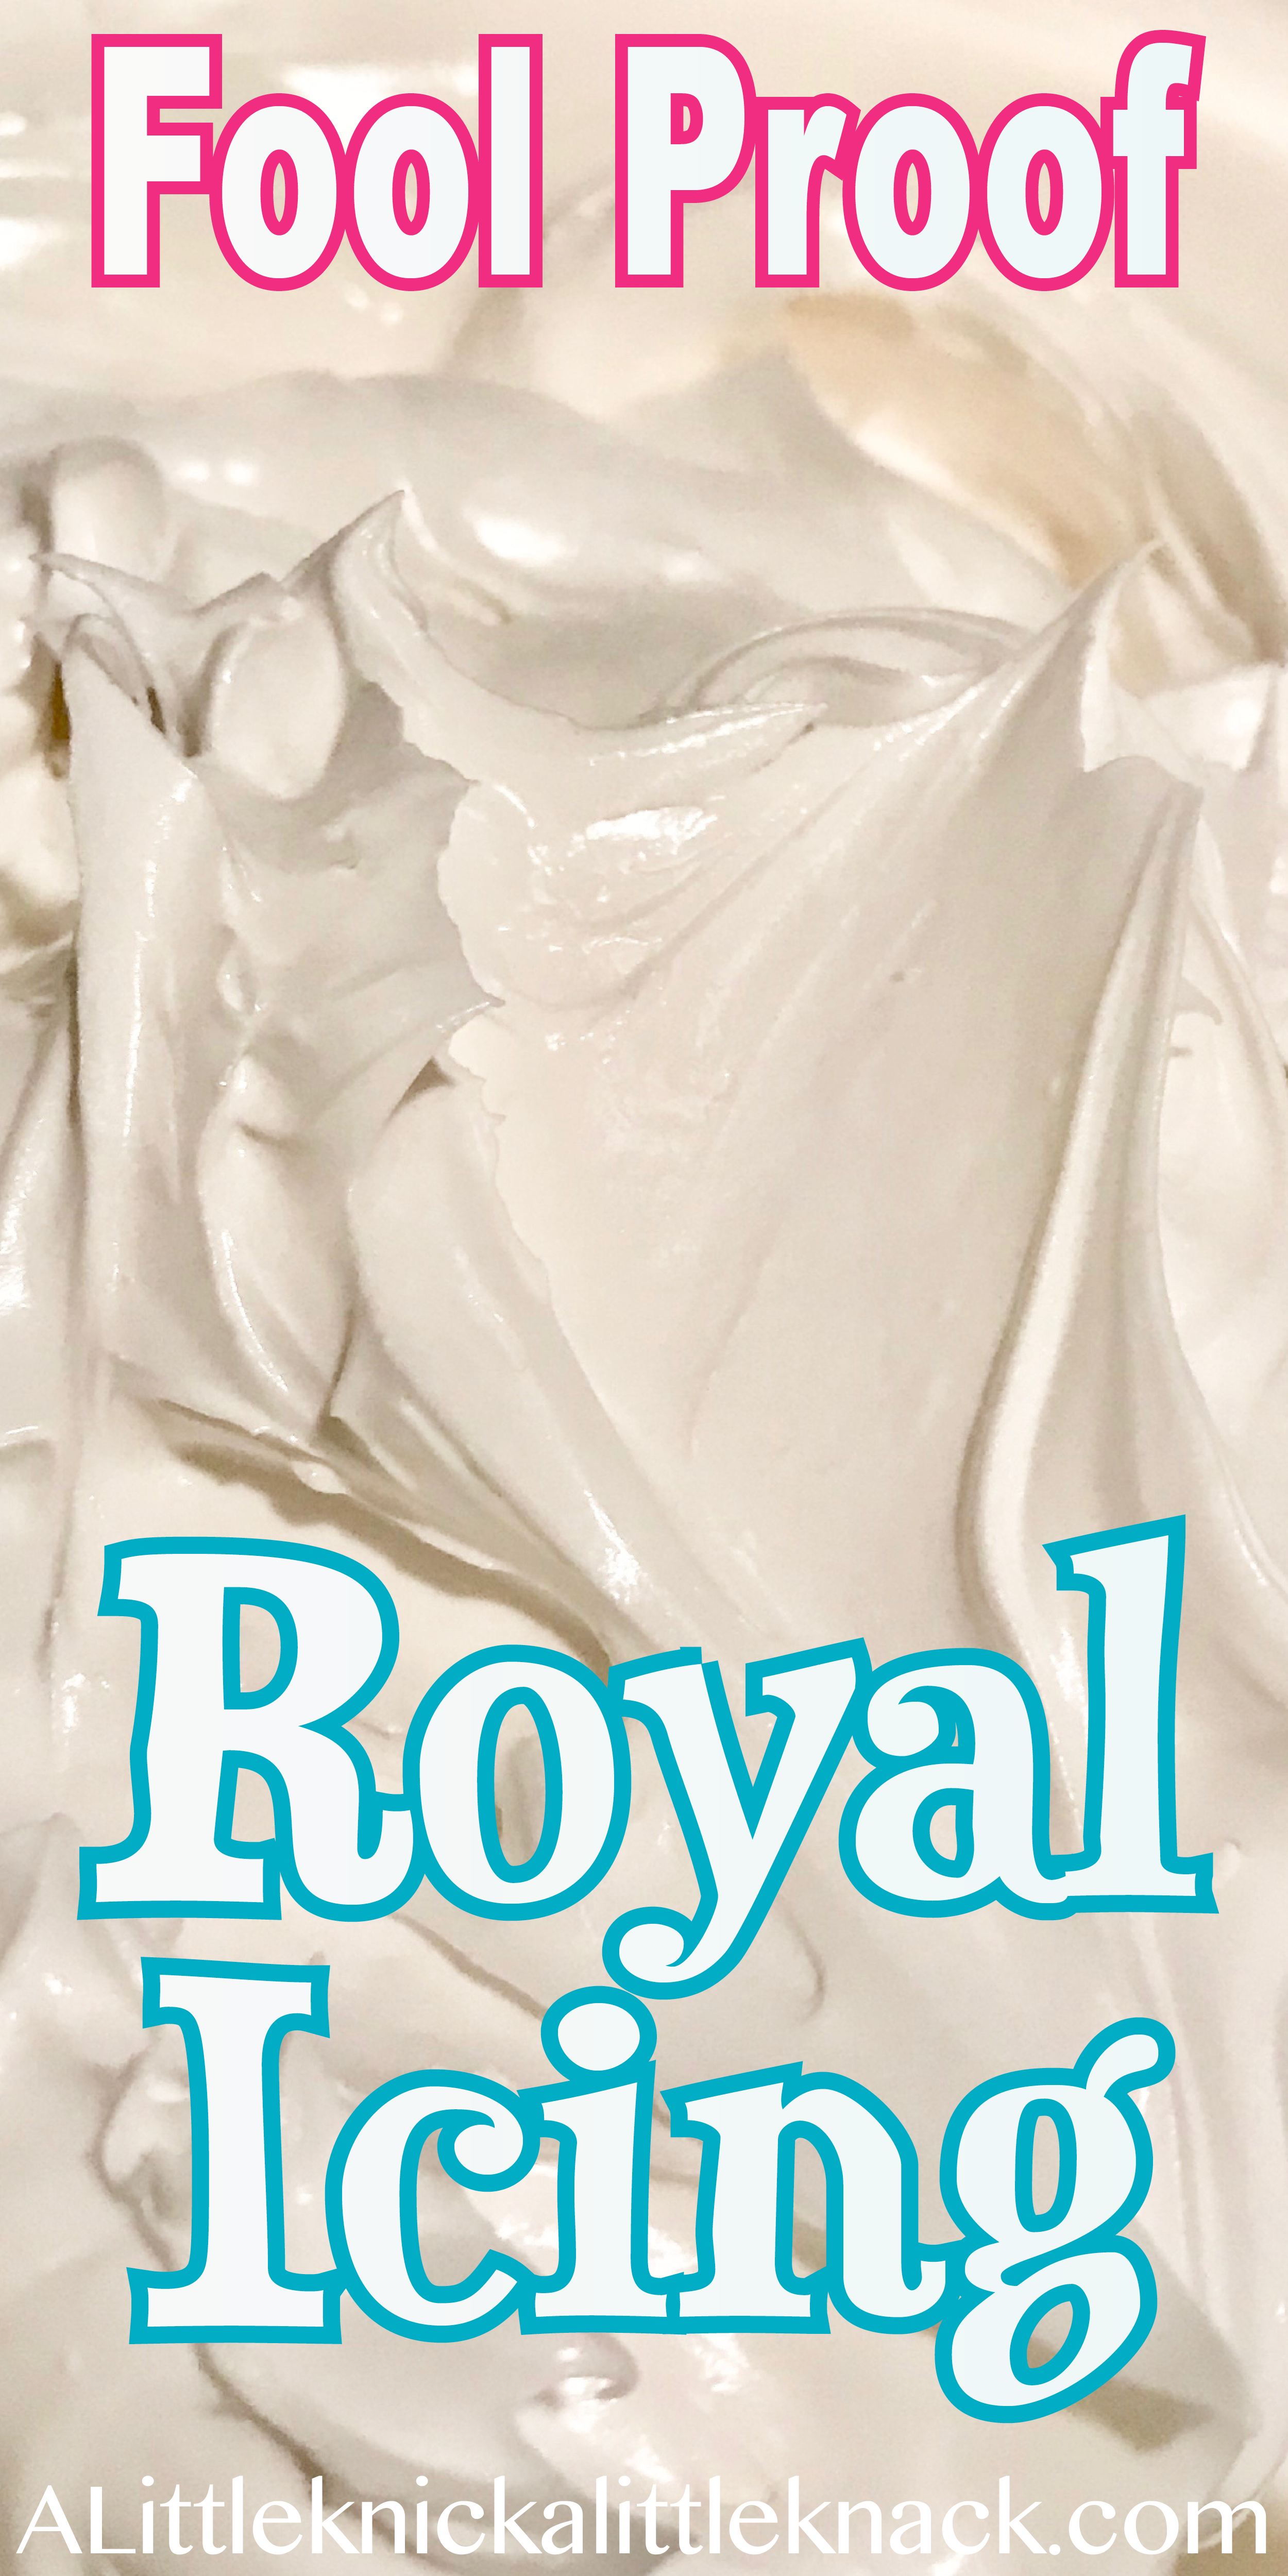 The key to a DELICIOUS sugar cookie is all in the royal icing. This fool proof royal icing recipe is super easy and tasty!